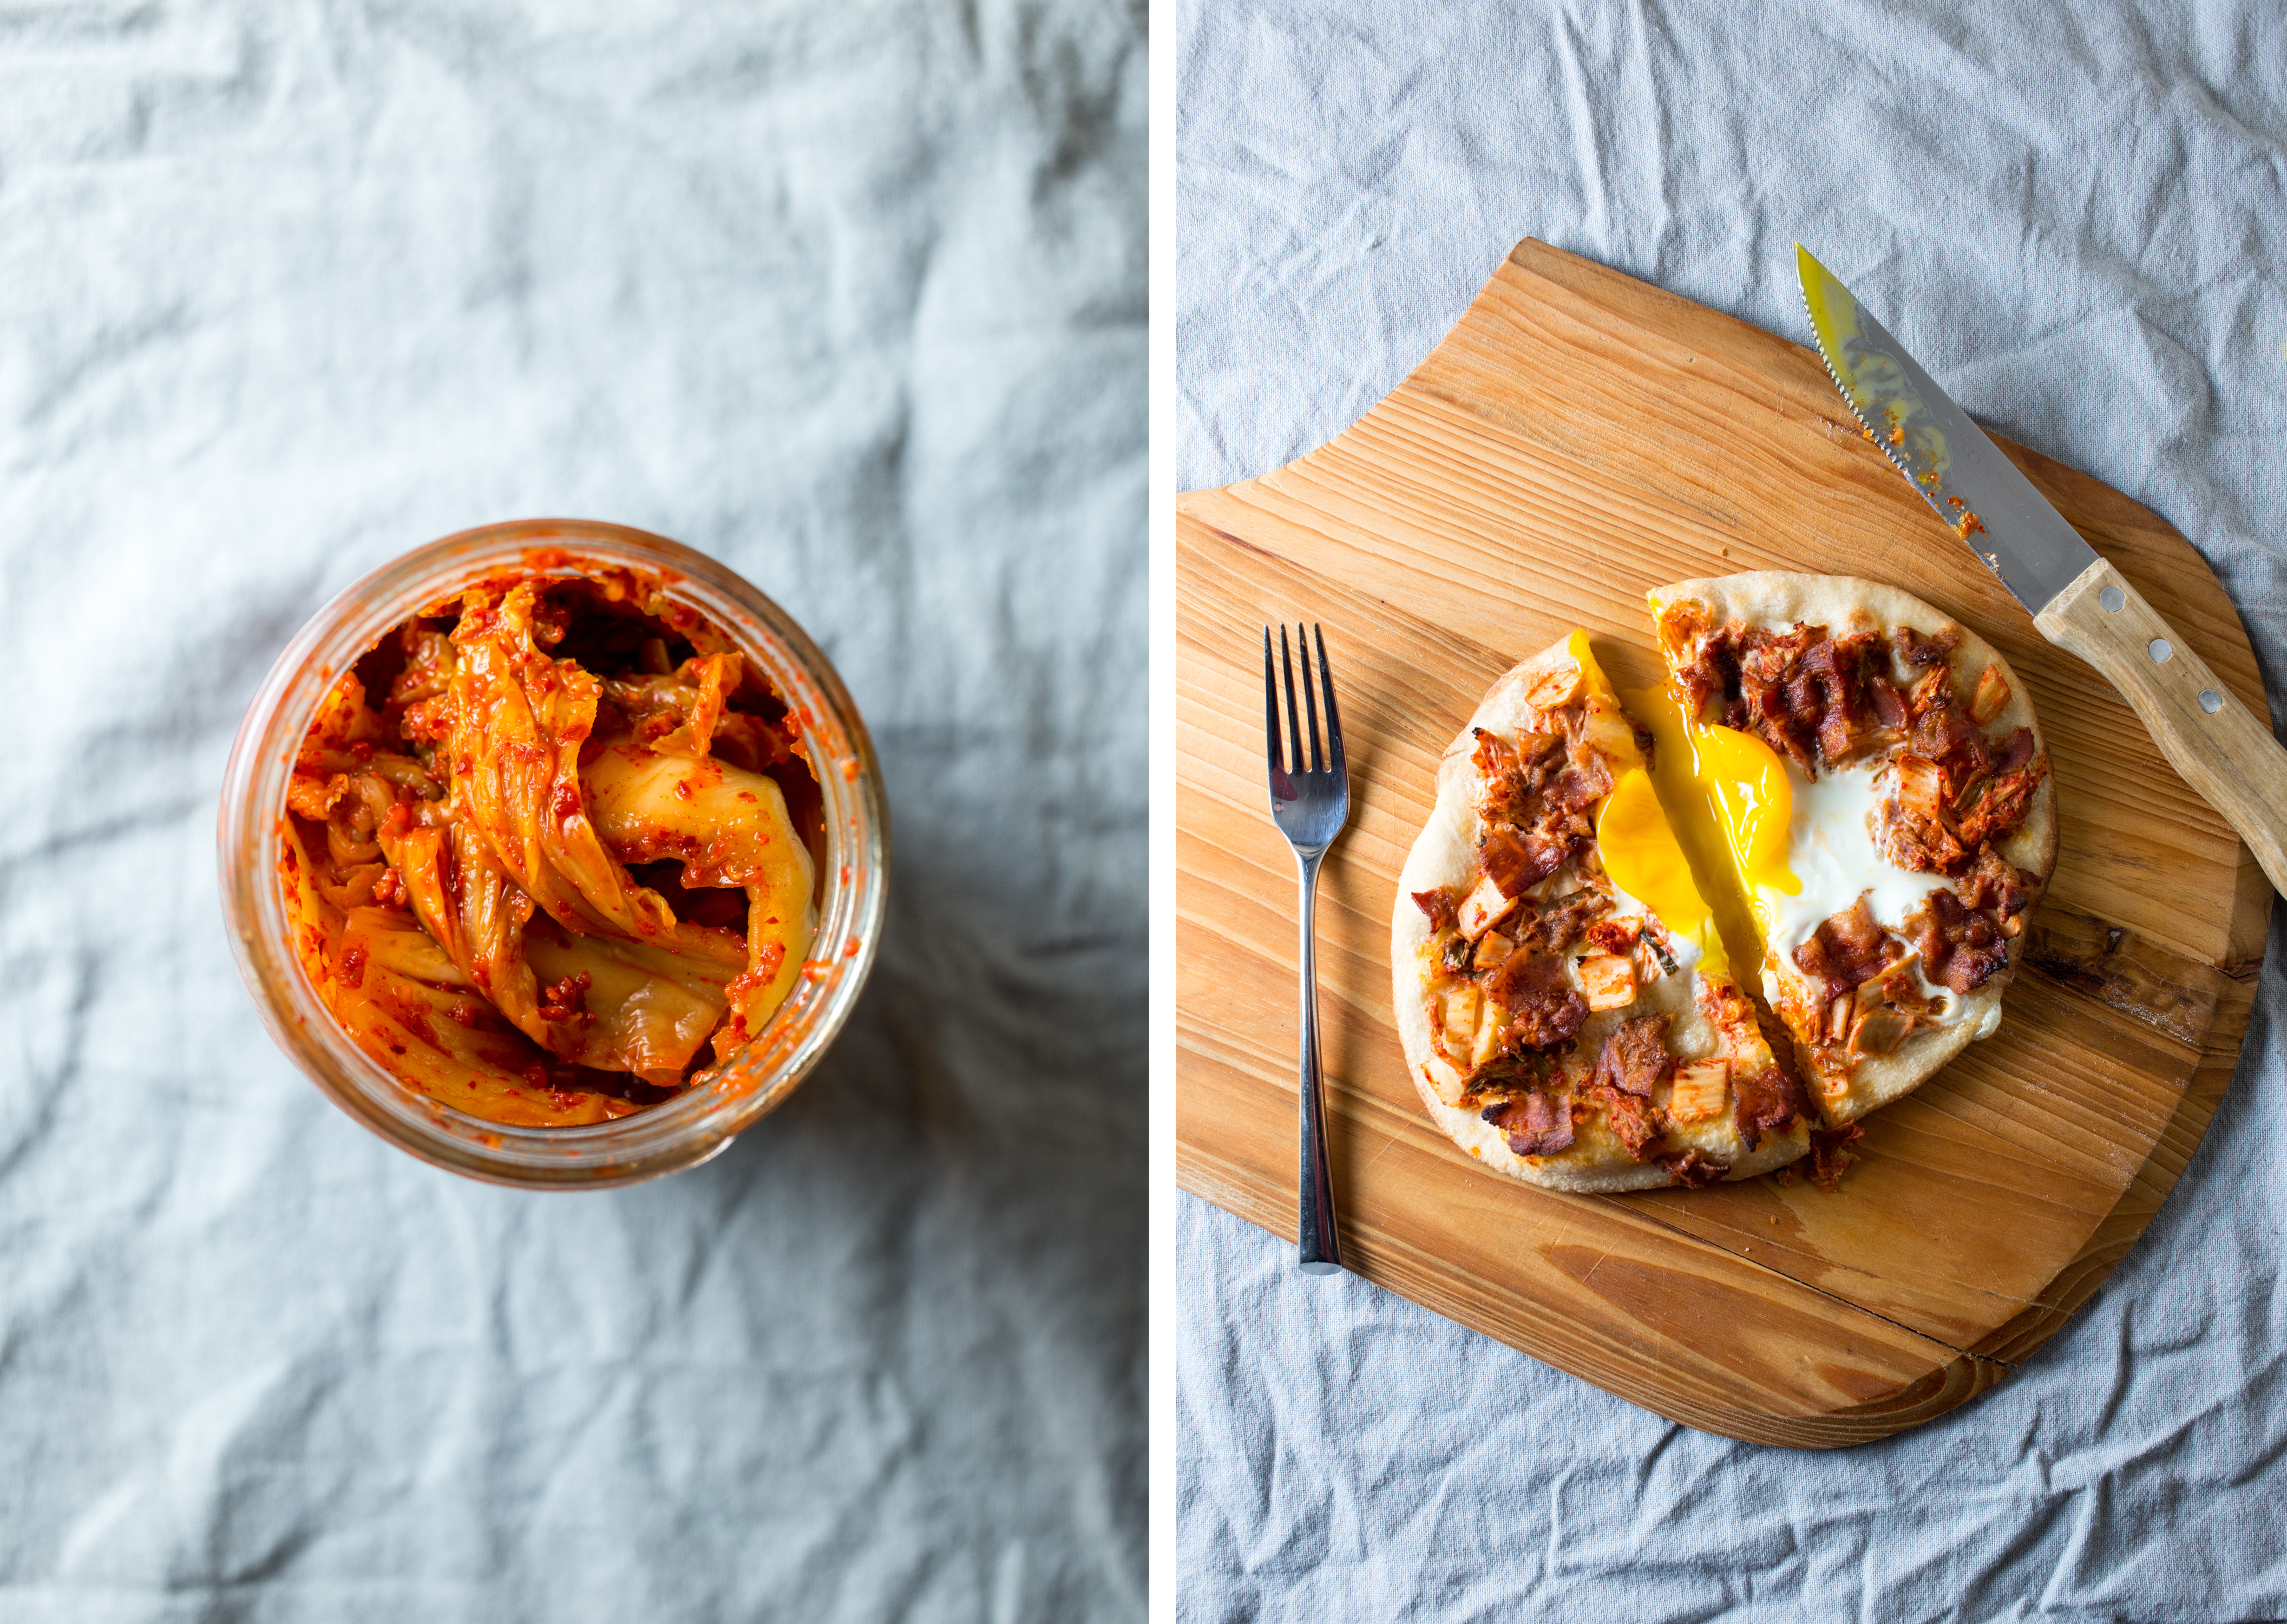 kimchi breakfast pizza - punctuated with food